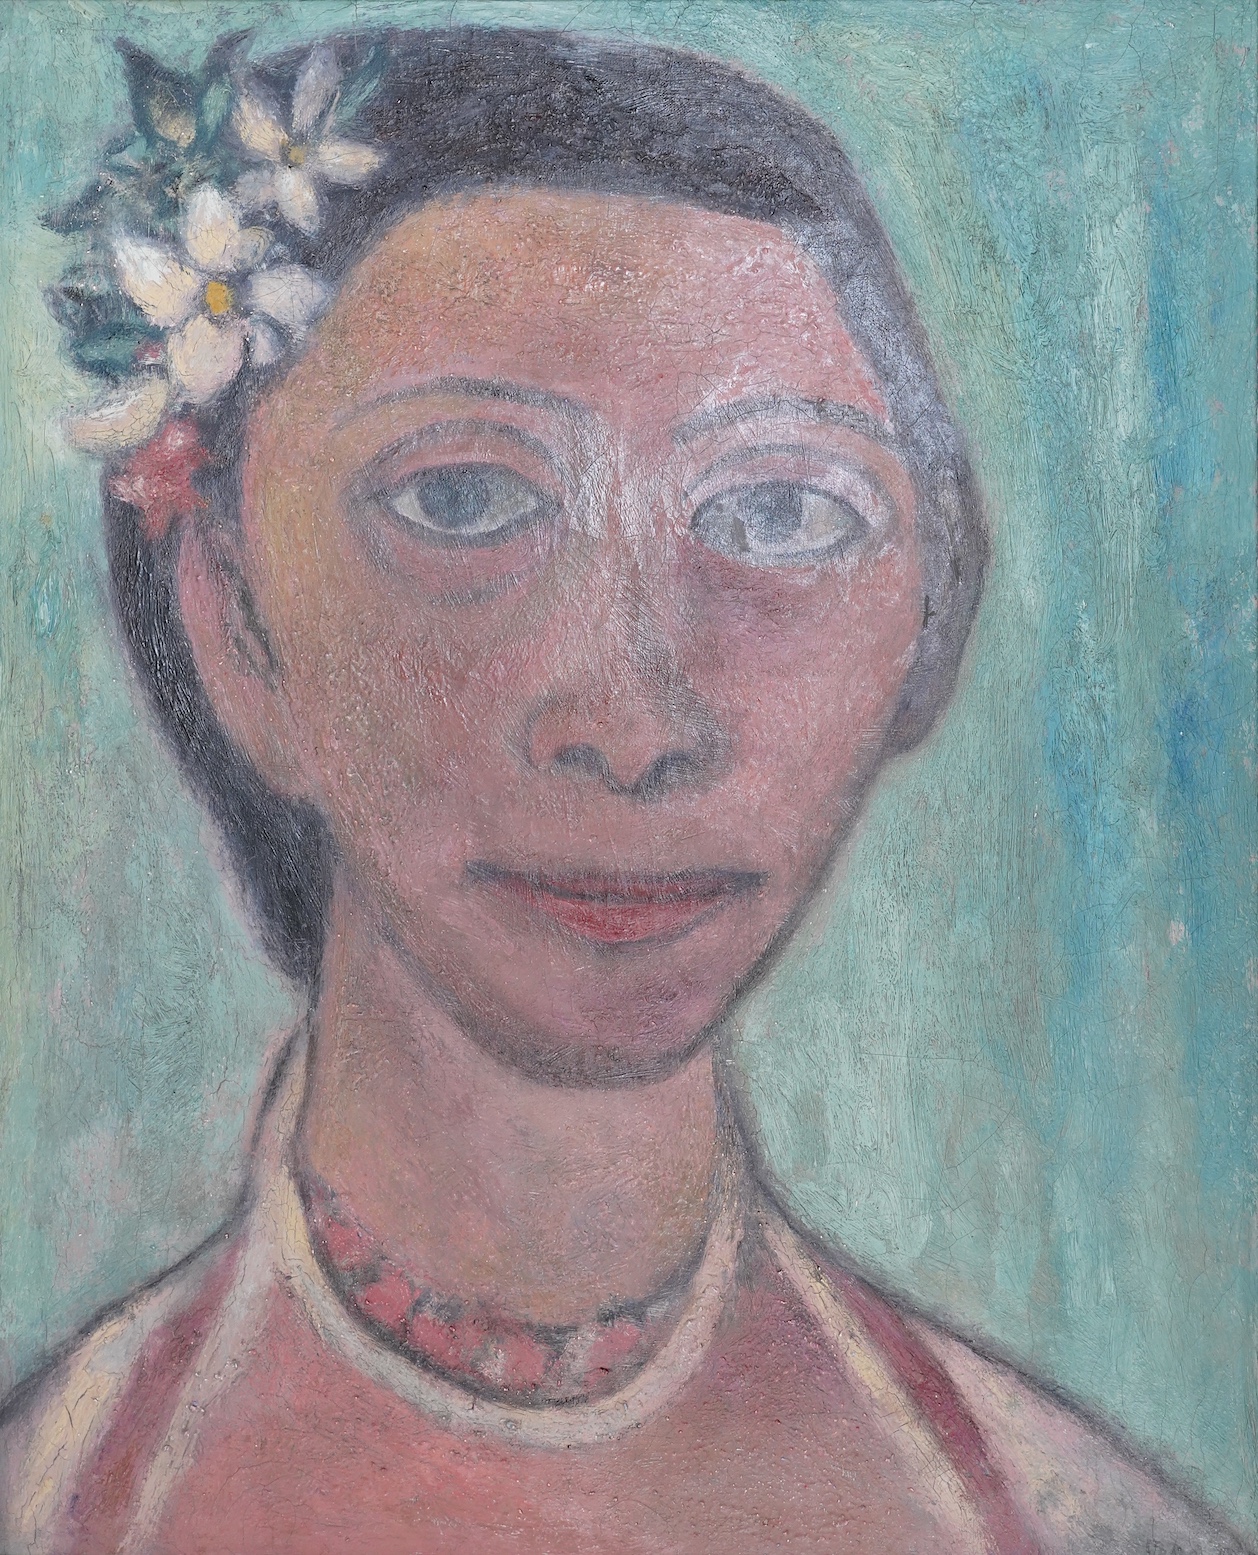 After Paula Modersohn-Becker (German, 1876-1907), oil on canvas, Portrait of a girl, 47 x 37cm. Condition - good, some surface dirt and minor craquelure